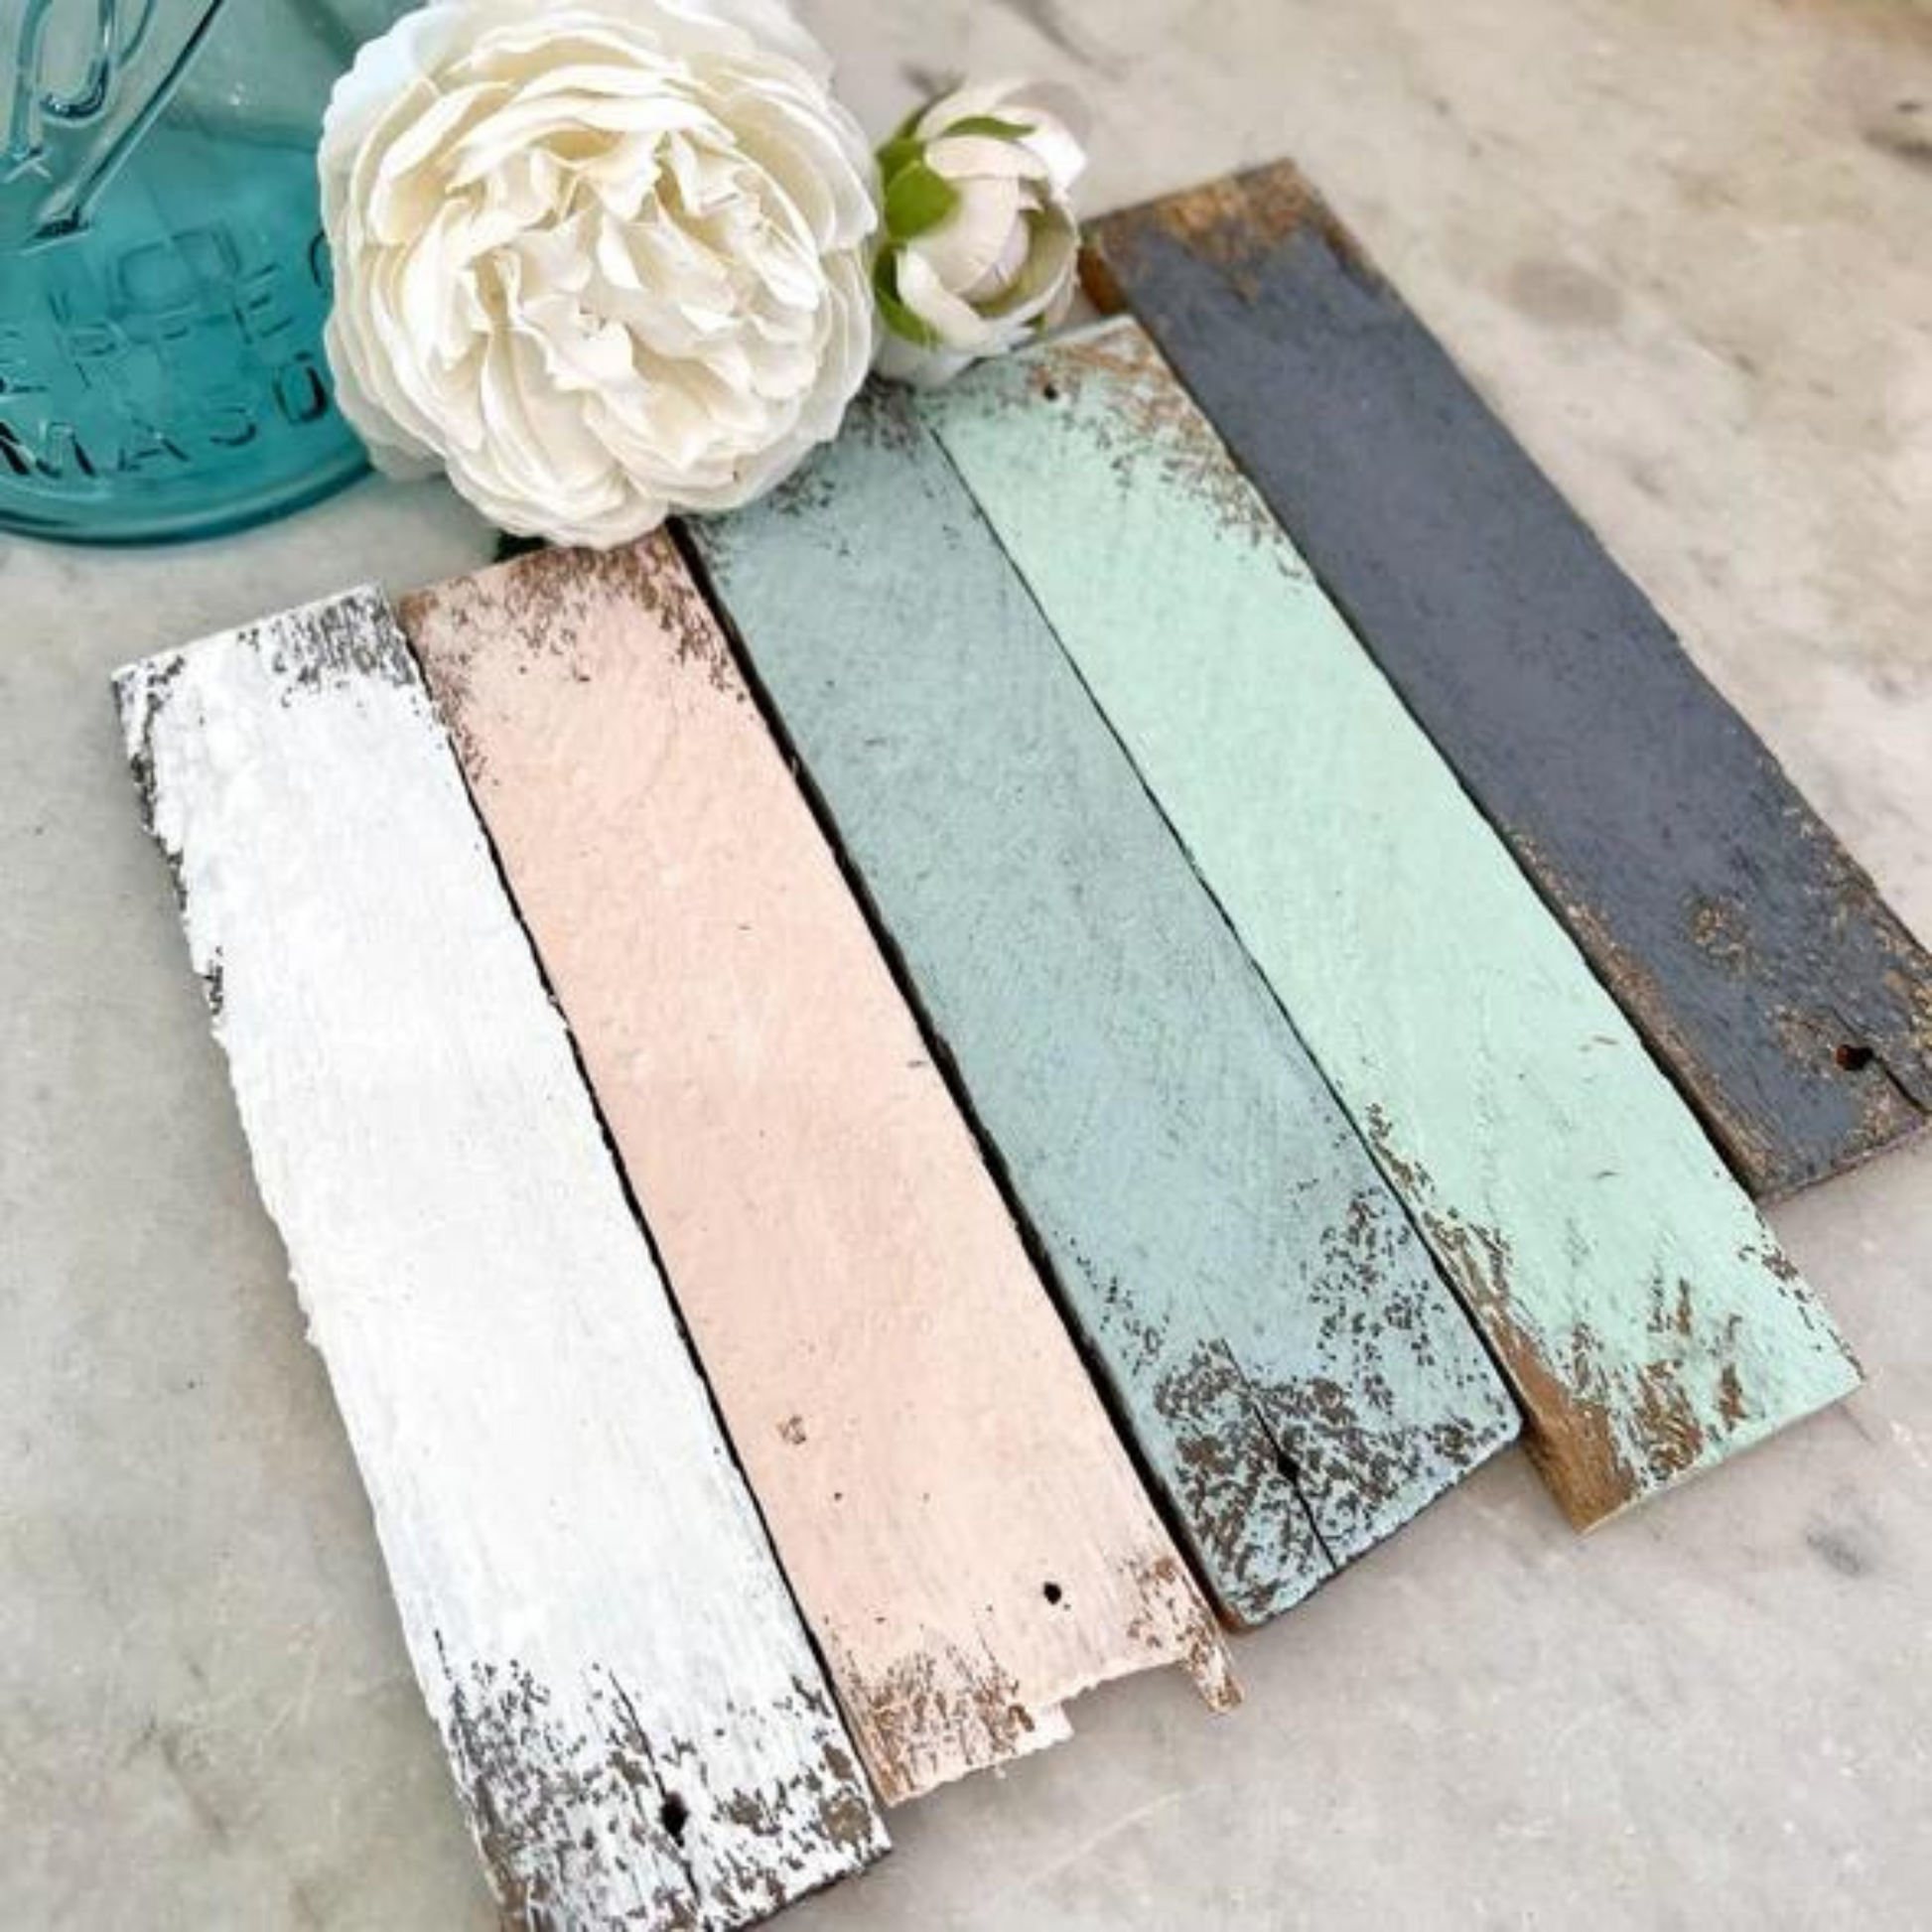 DIY Cottage Color Paint curated by Jamie Ray Vintage exclusively for Debi's Design Diary DIY Paint. Five color example includes White Linen, Vintage Pink, Haint Blue, Vintage Mint and Grey Skies. Available in pints at Milton's Daughter.